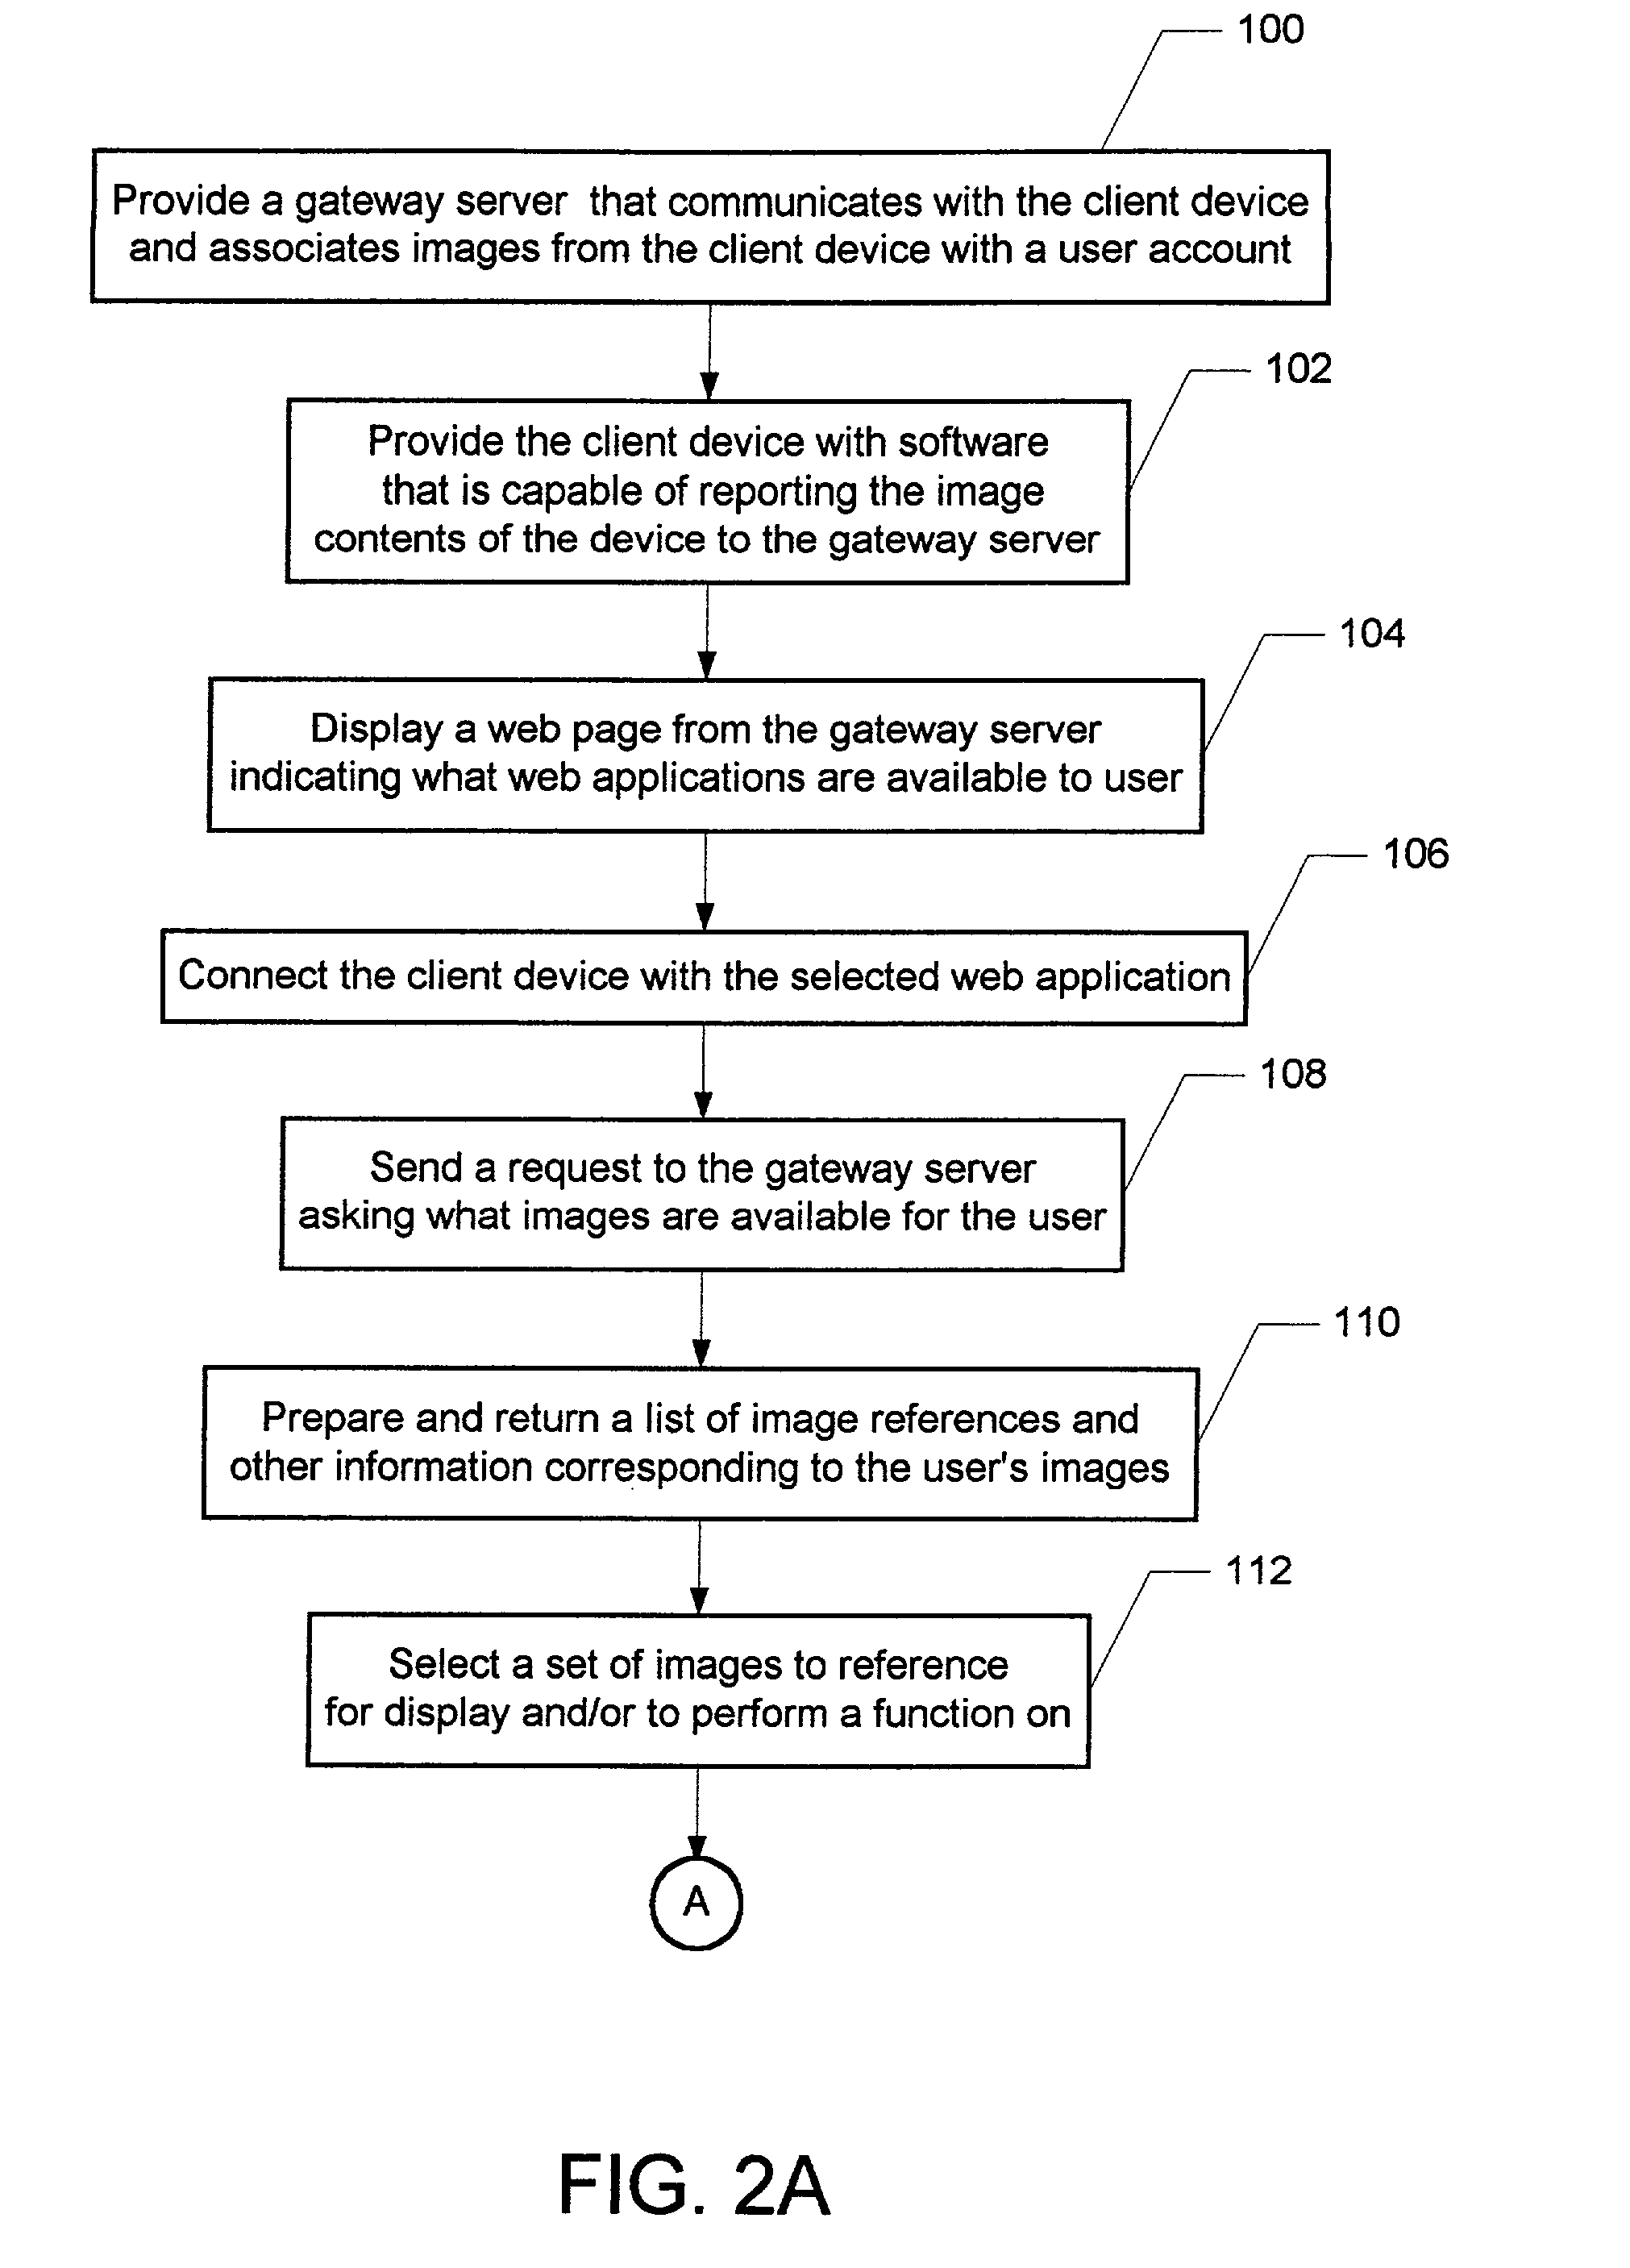 Meta-application architecture for integrating photo-service websites for browser-enabled devices